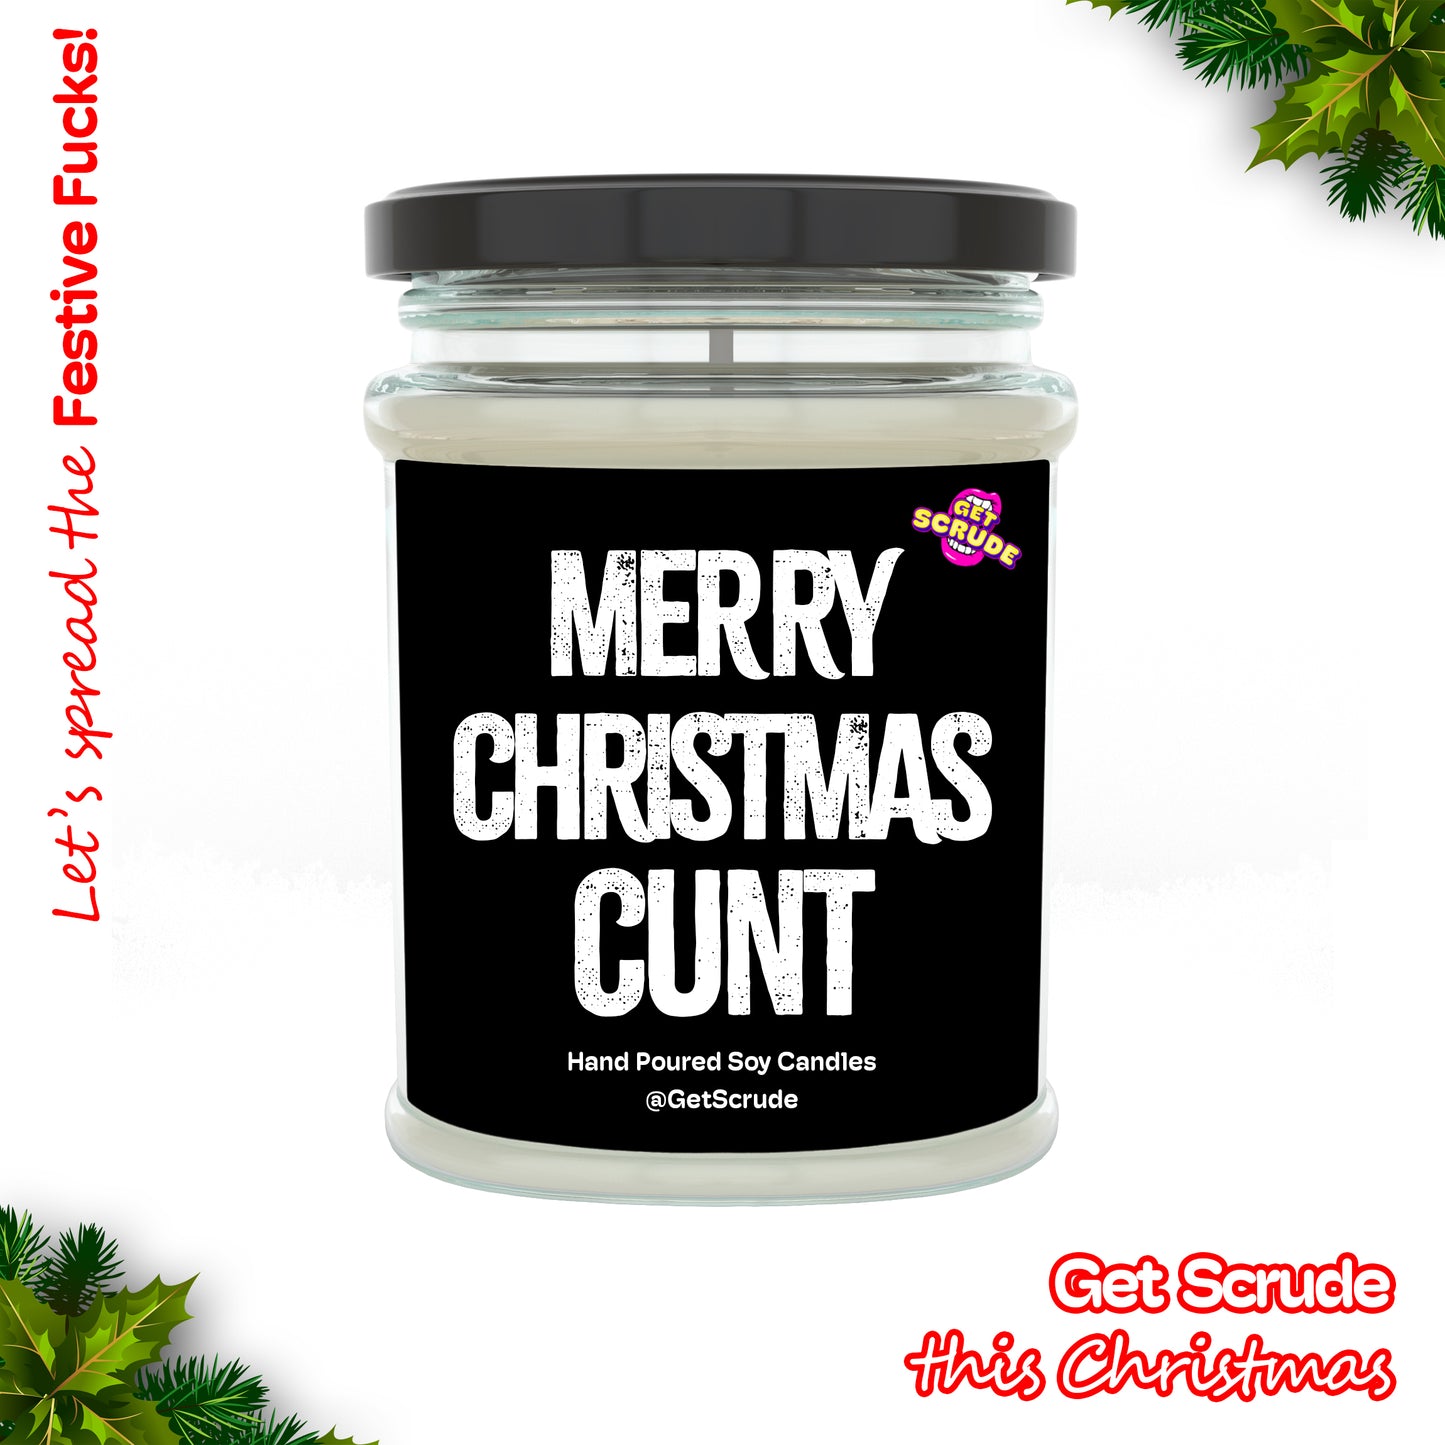 Merry Christmas Cunt